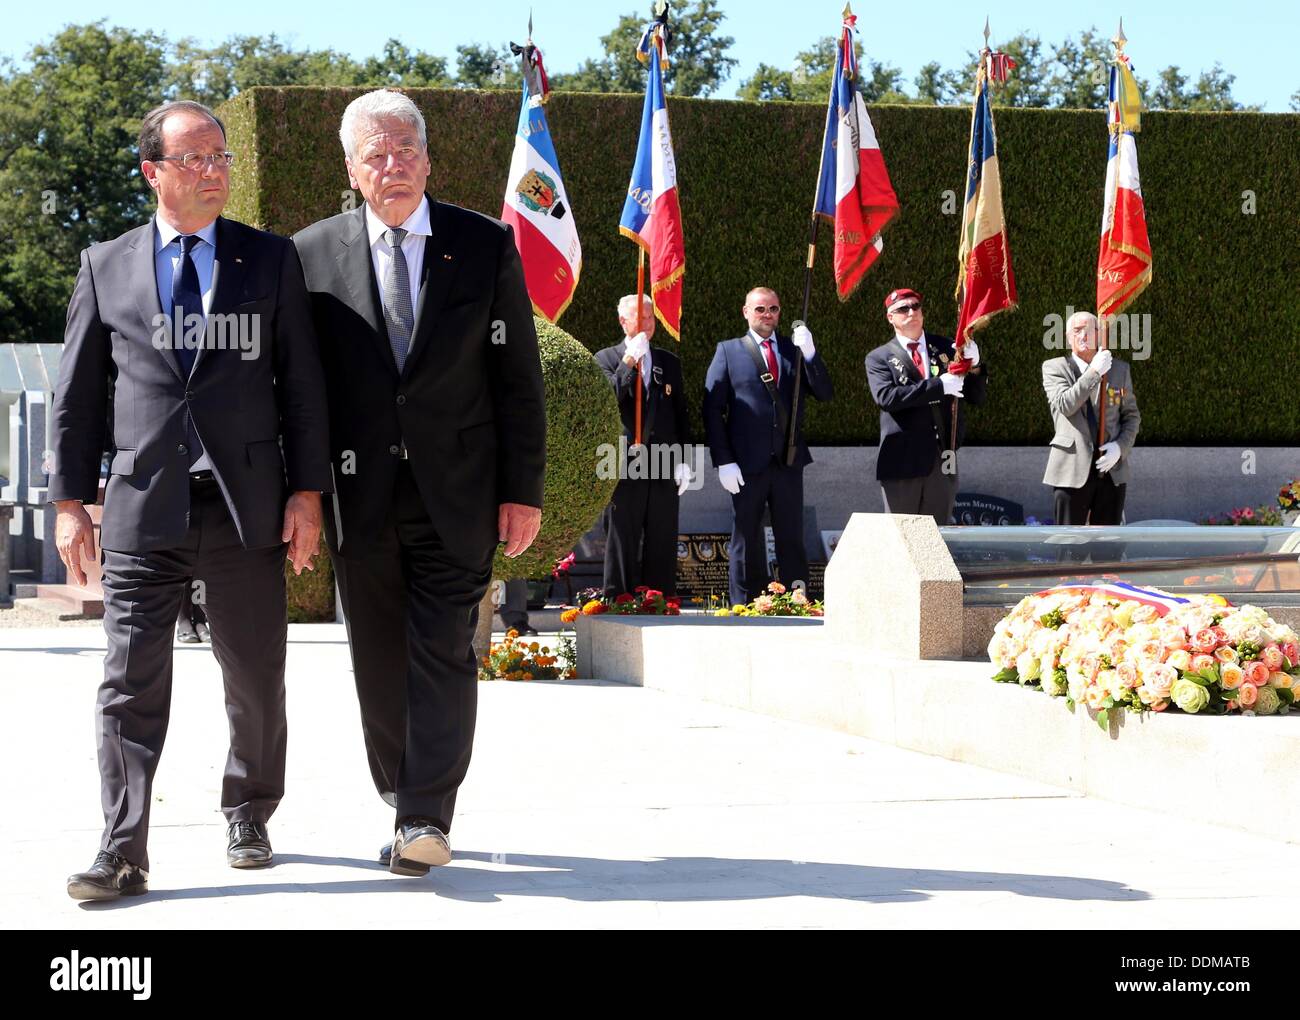 Oradour-sur-Glane, France. 04th Sep, 2013. German President Joachim Gauck (R) and French President Francois Hollande visit the memorial site in Oradour-sur-Glane, France, 04 September 2013. A unit of SS officers murdered 642 citizens of the town in June 1944. The German President is on a three-day visit to France. Photo: WOLFGANG KUMM/dpa/Alamy Live News Stock Photo